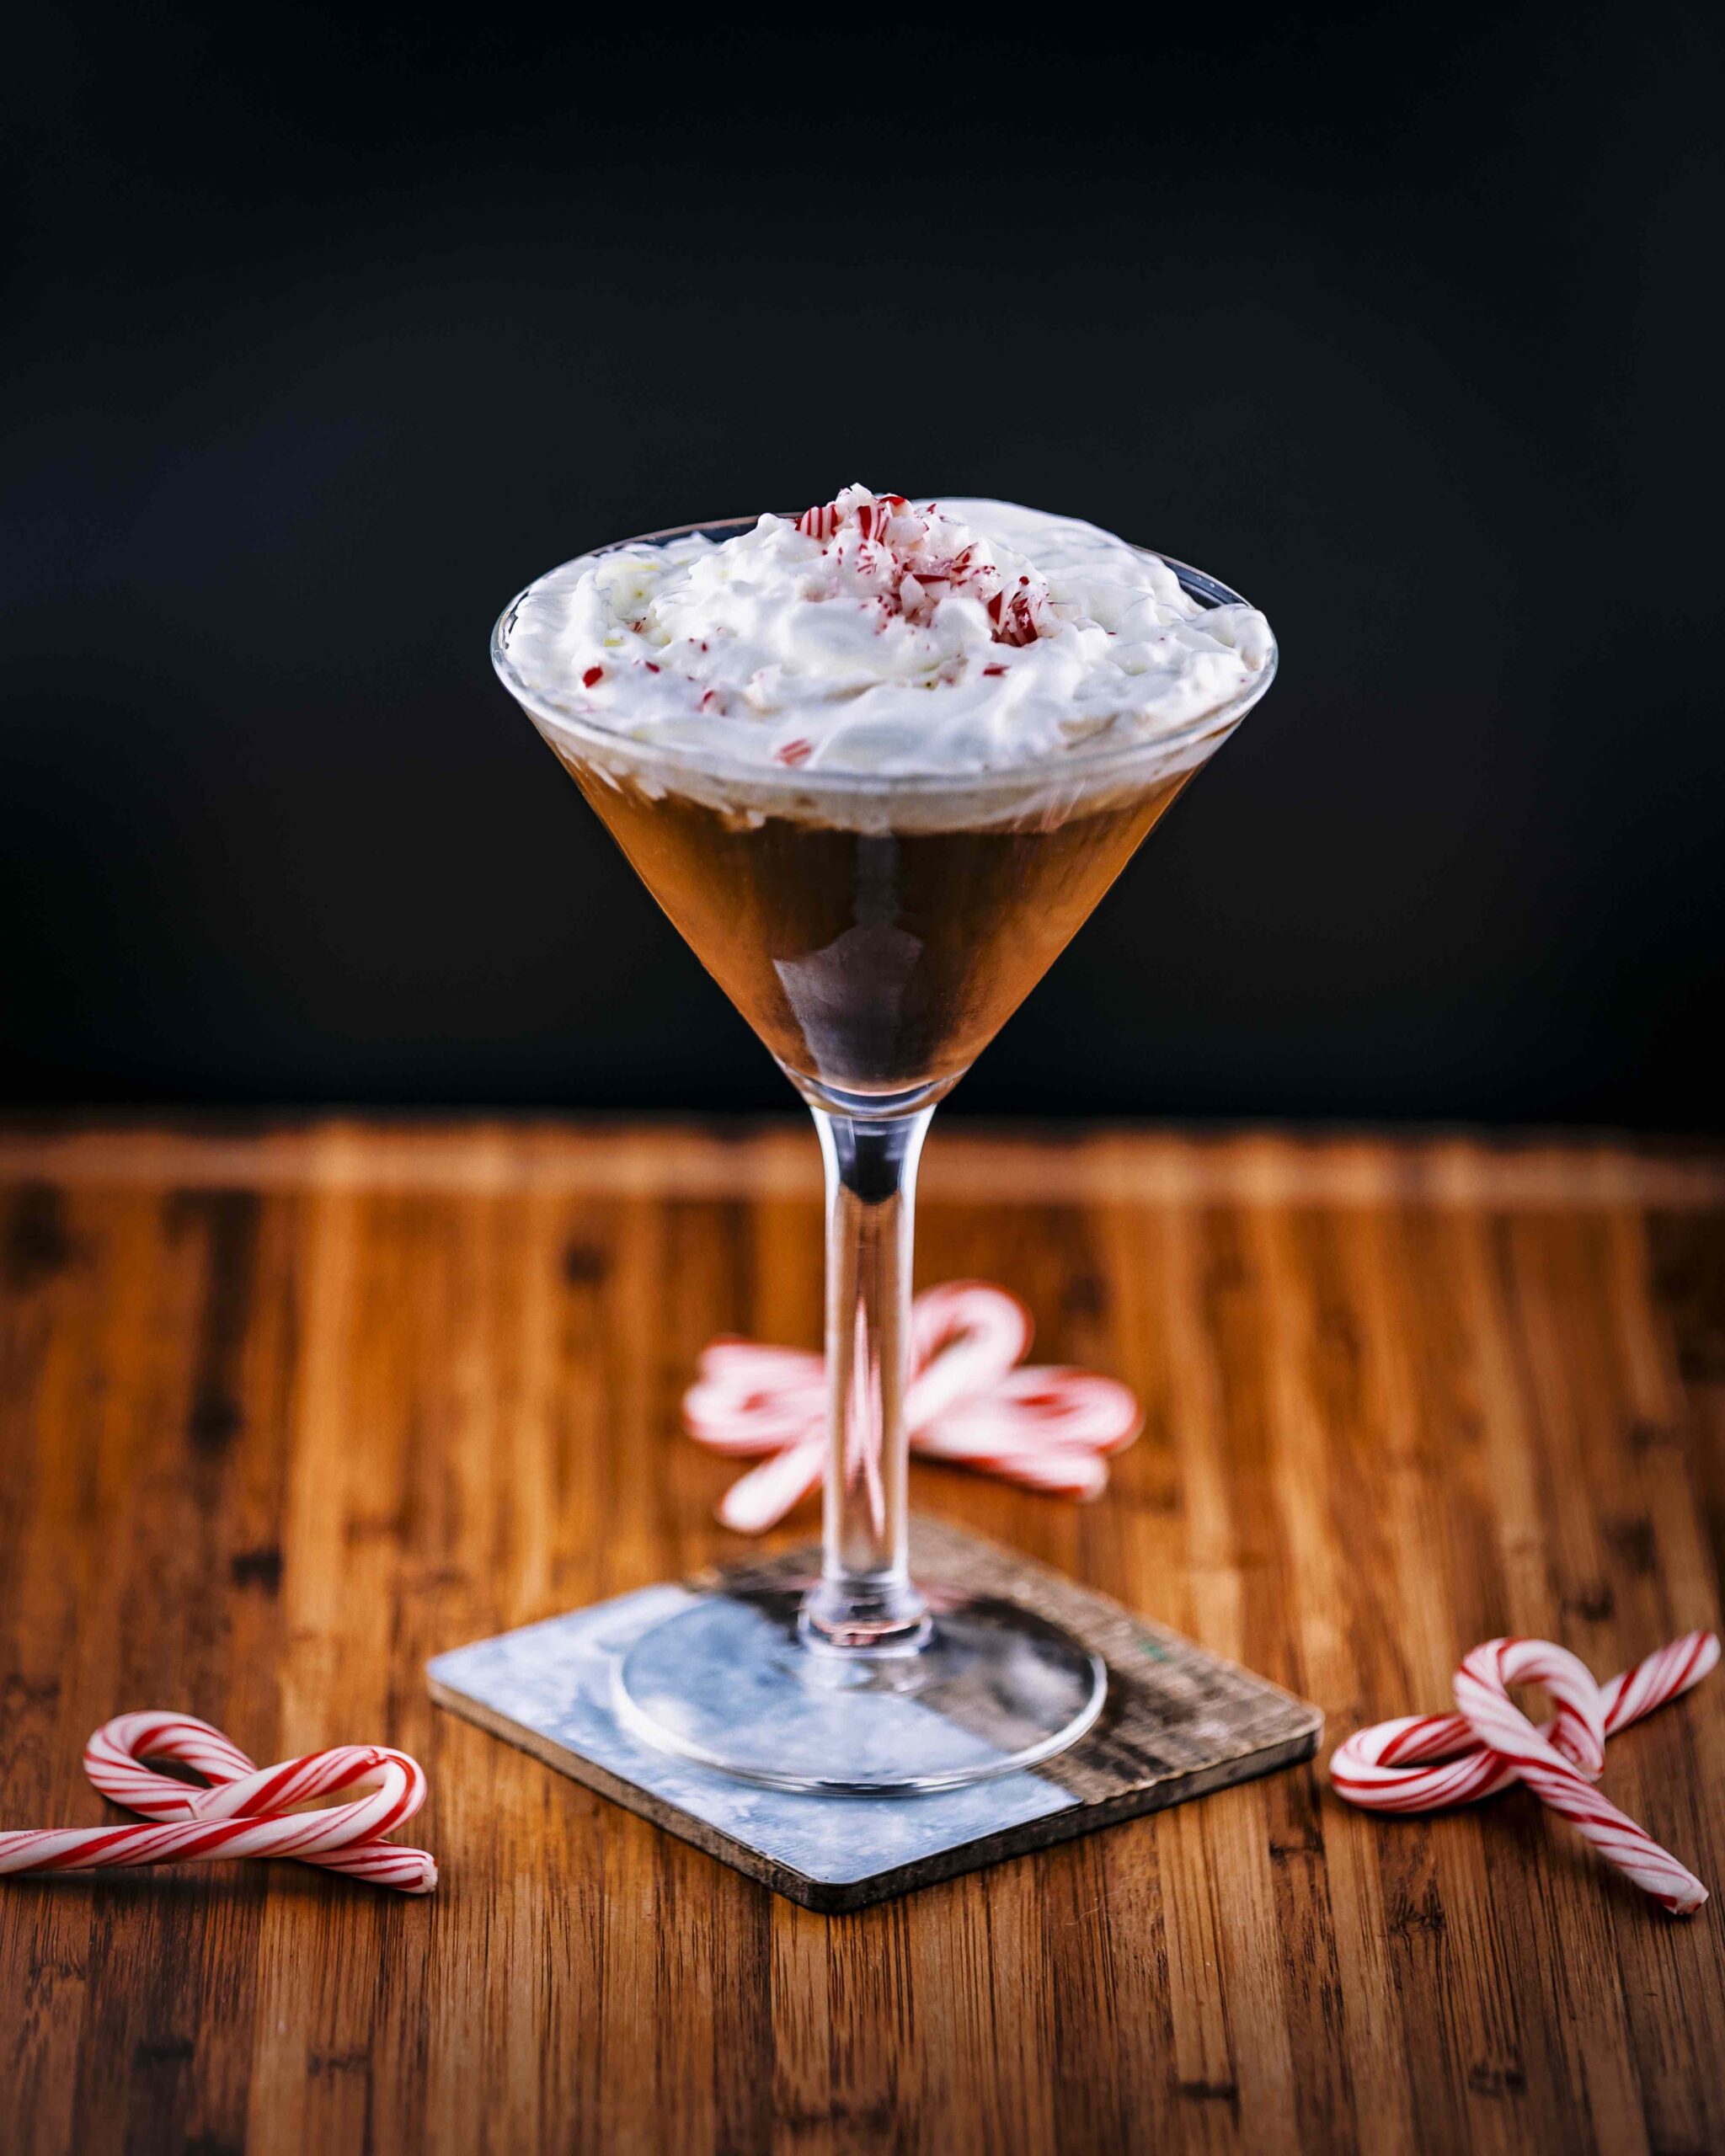 An image of the Peppermint Espresso Martini from Black Angus.